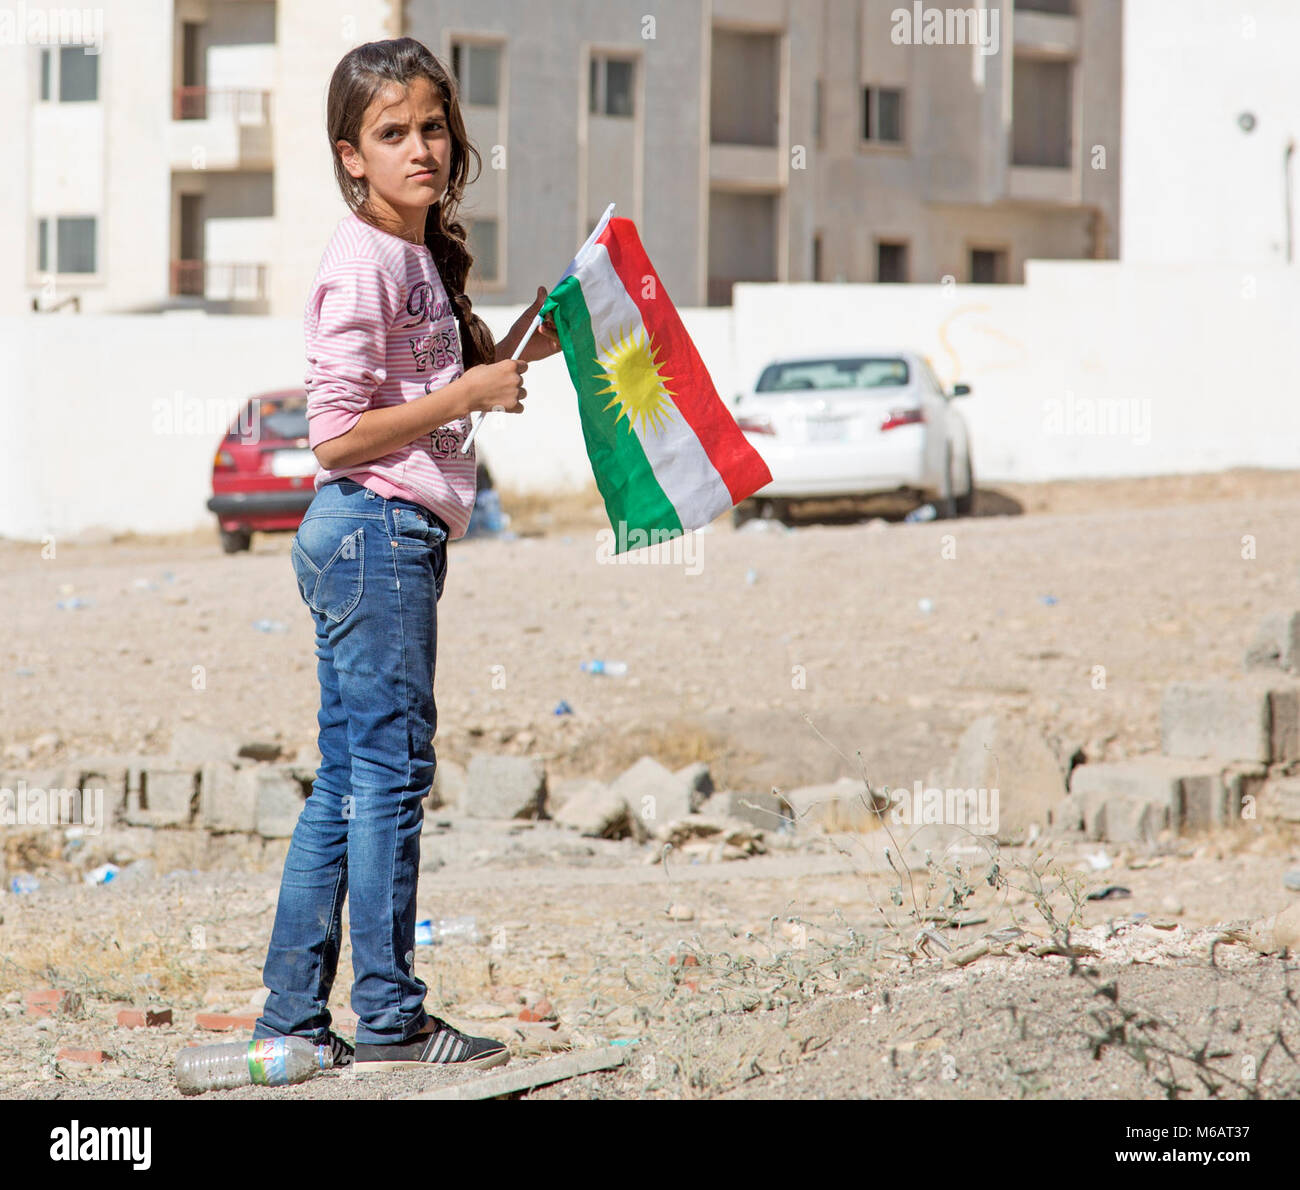 A young Kurdish girl holds a flag in a make-shift internally displaced person camp at the Kurdistan Training Coordination Center near Erbil, Iraq, October 19, 2017. (U.S. Army Stock Photo